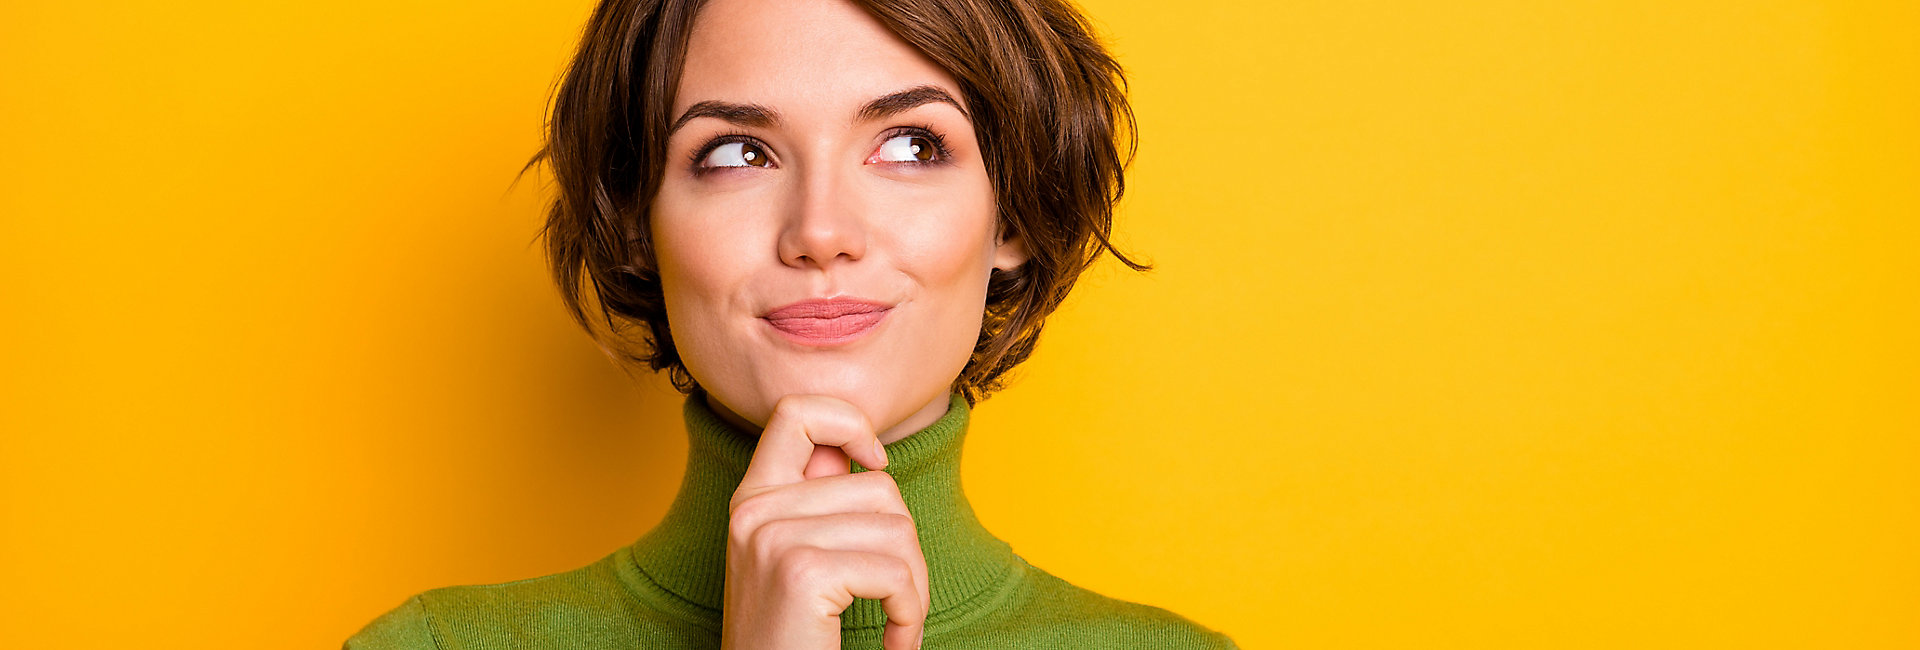 Closeup photo of amazing short hairdo lady looking up empty space deep thinking creative person arm on chin wear casual green turtleneck isolated yellow color background; Shutterstock ID 1617540484; purchase_order: -; job: -; client: -